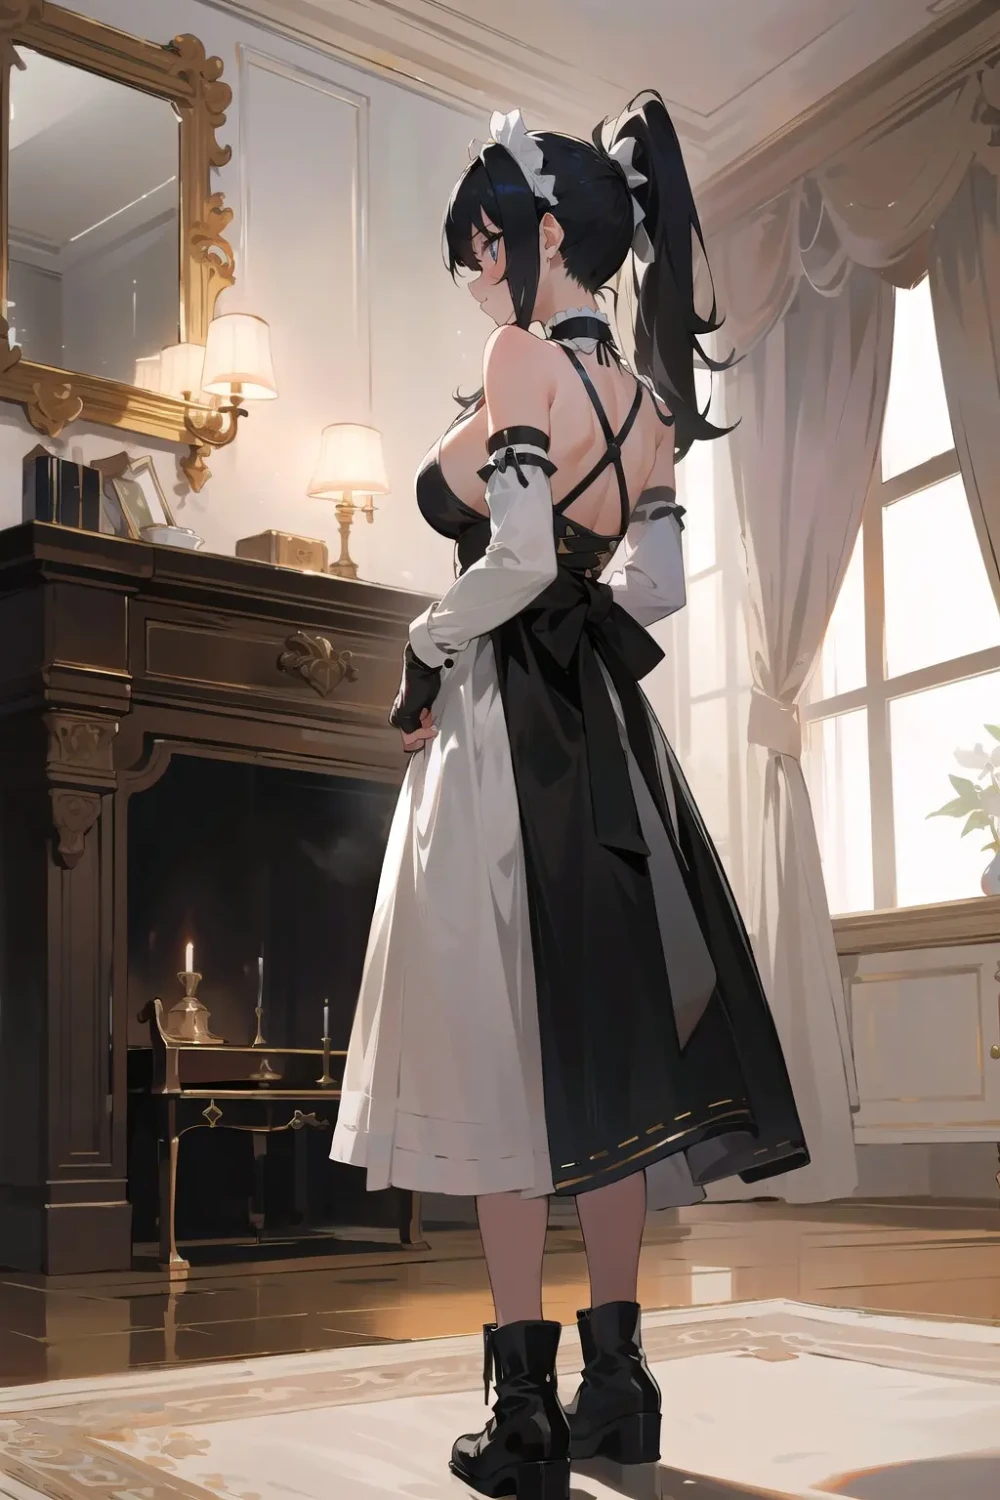 maid-anime-style-all-ages-29